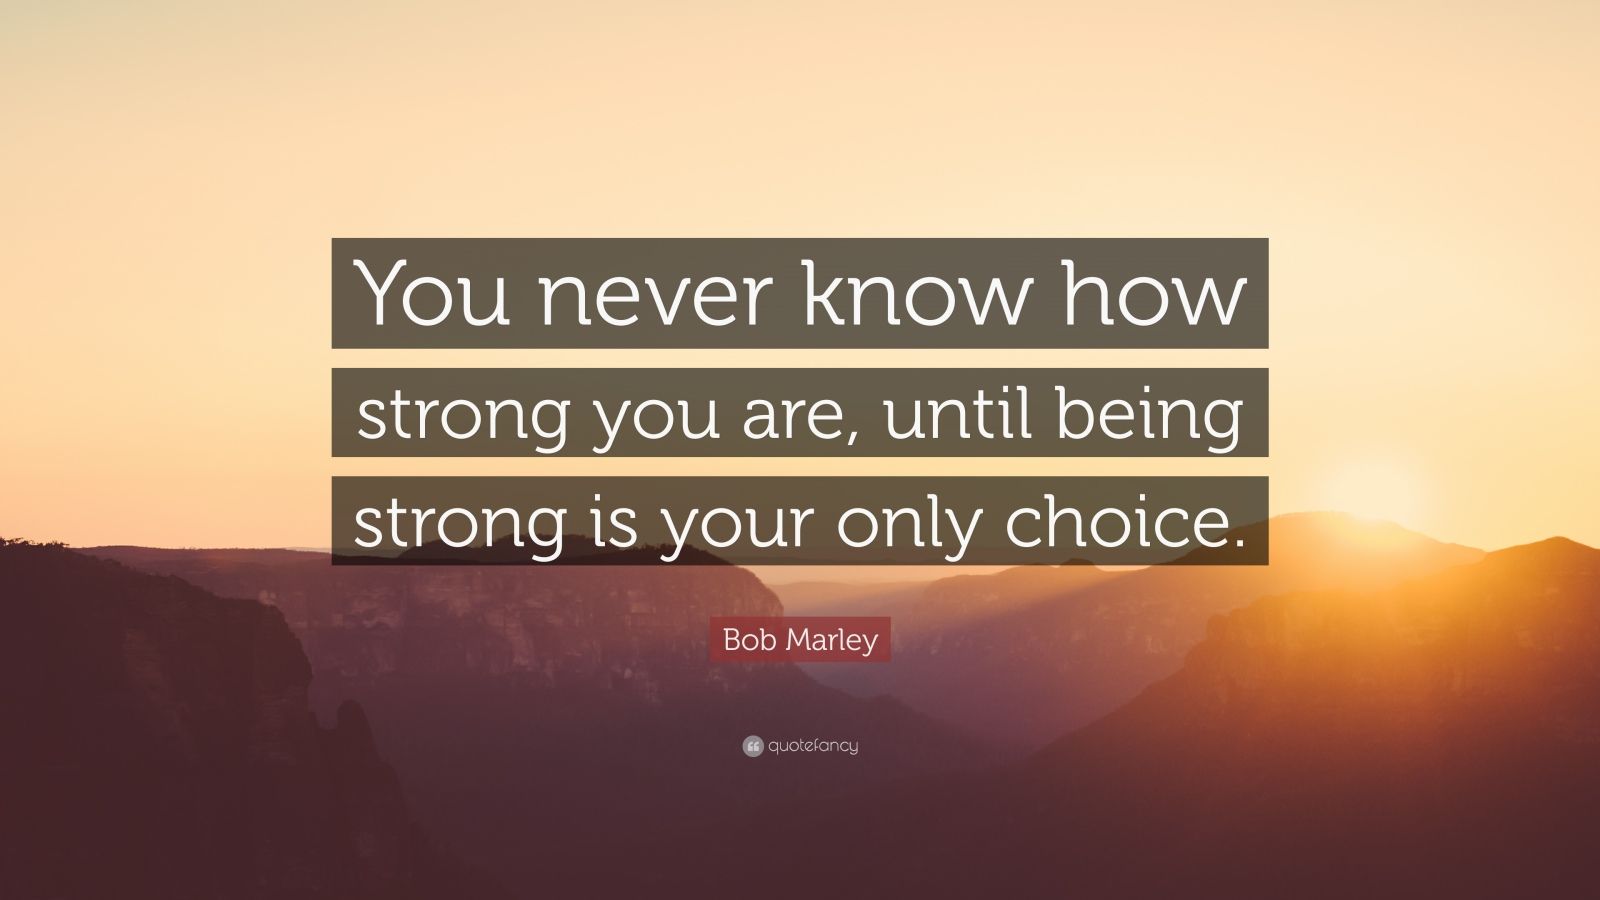 Bob Marley Quote: "You never know how strong you are, until being strong is your only choice ...